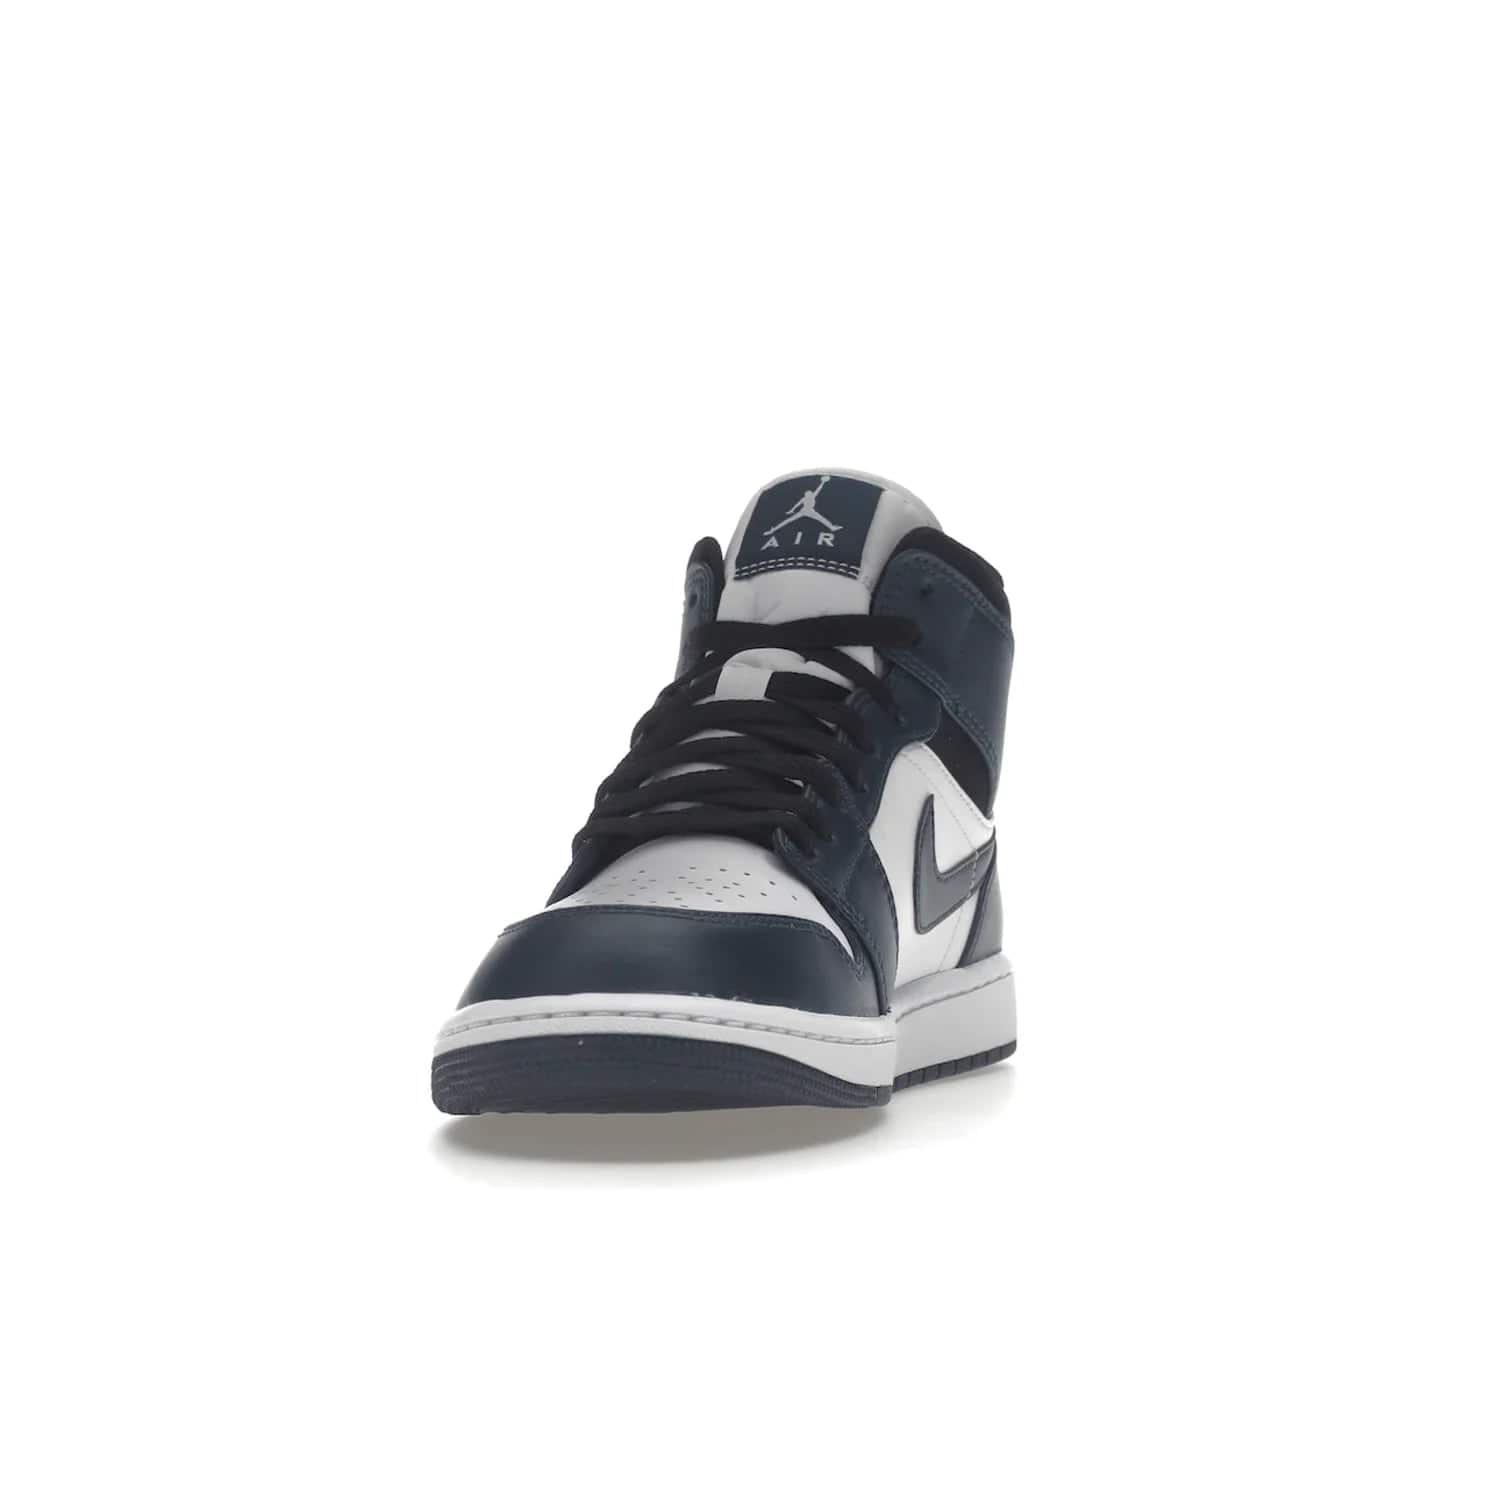 Jordan 1 Mid Armory Navy - Image 12 - Only at www.BallersClubKickz.com - The Jordan 1 Mid Armory Navy: classic basketball sneaker with soft white leather upper, deep navy blue overlays, and black leather ankle detailing. Iconic style with Jordan Wings logo and Jumpman label.